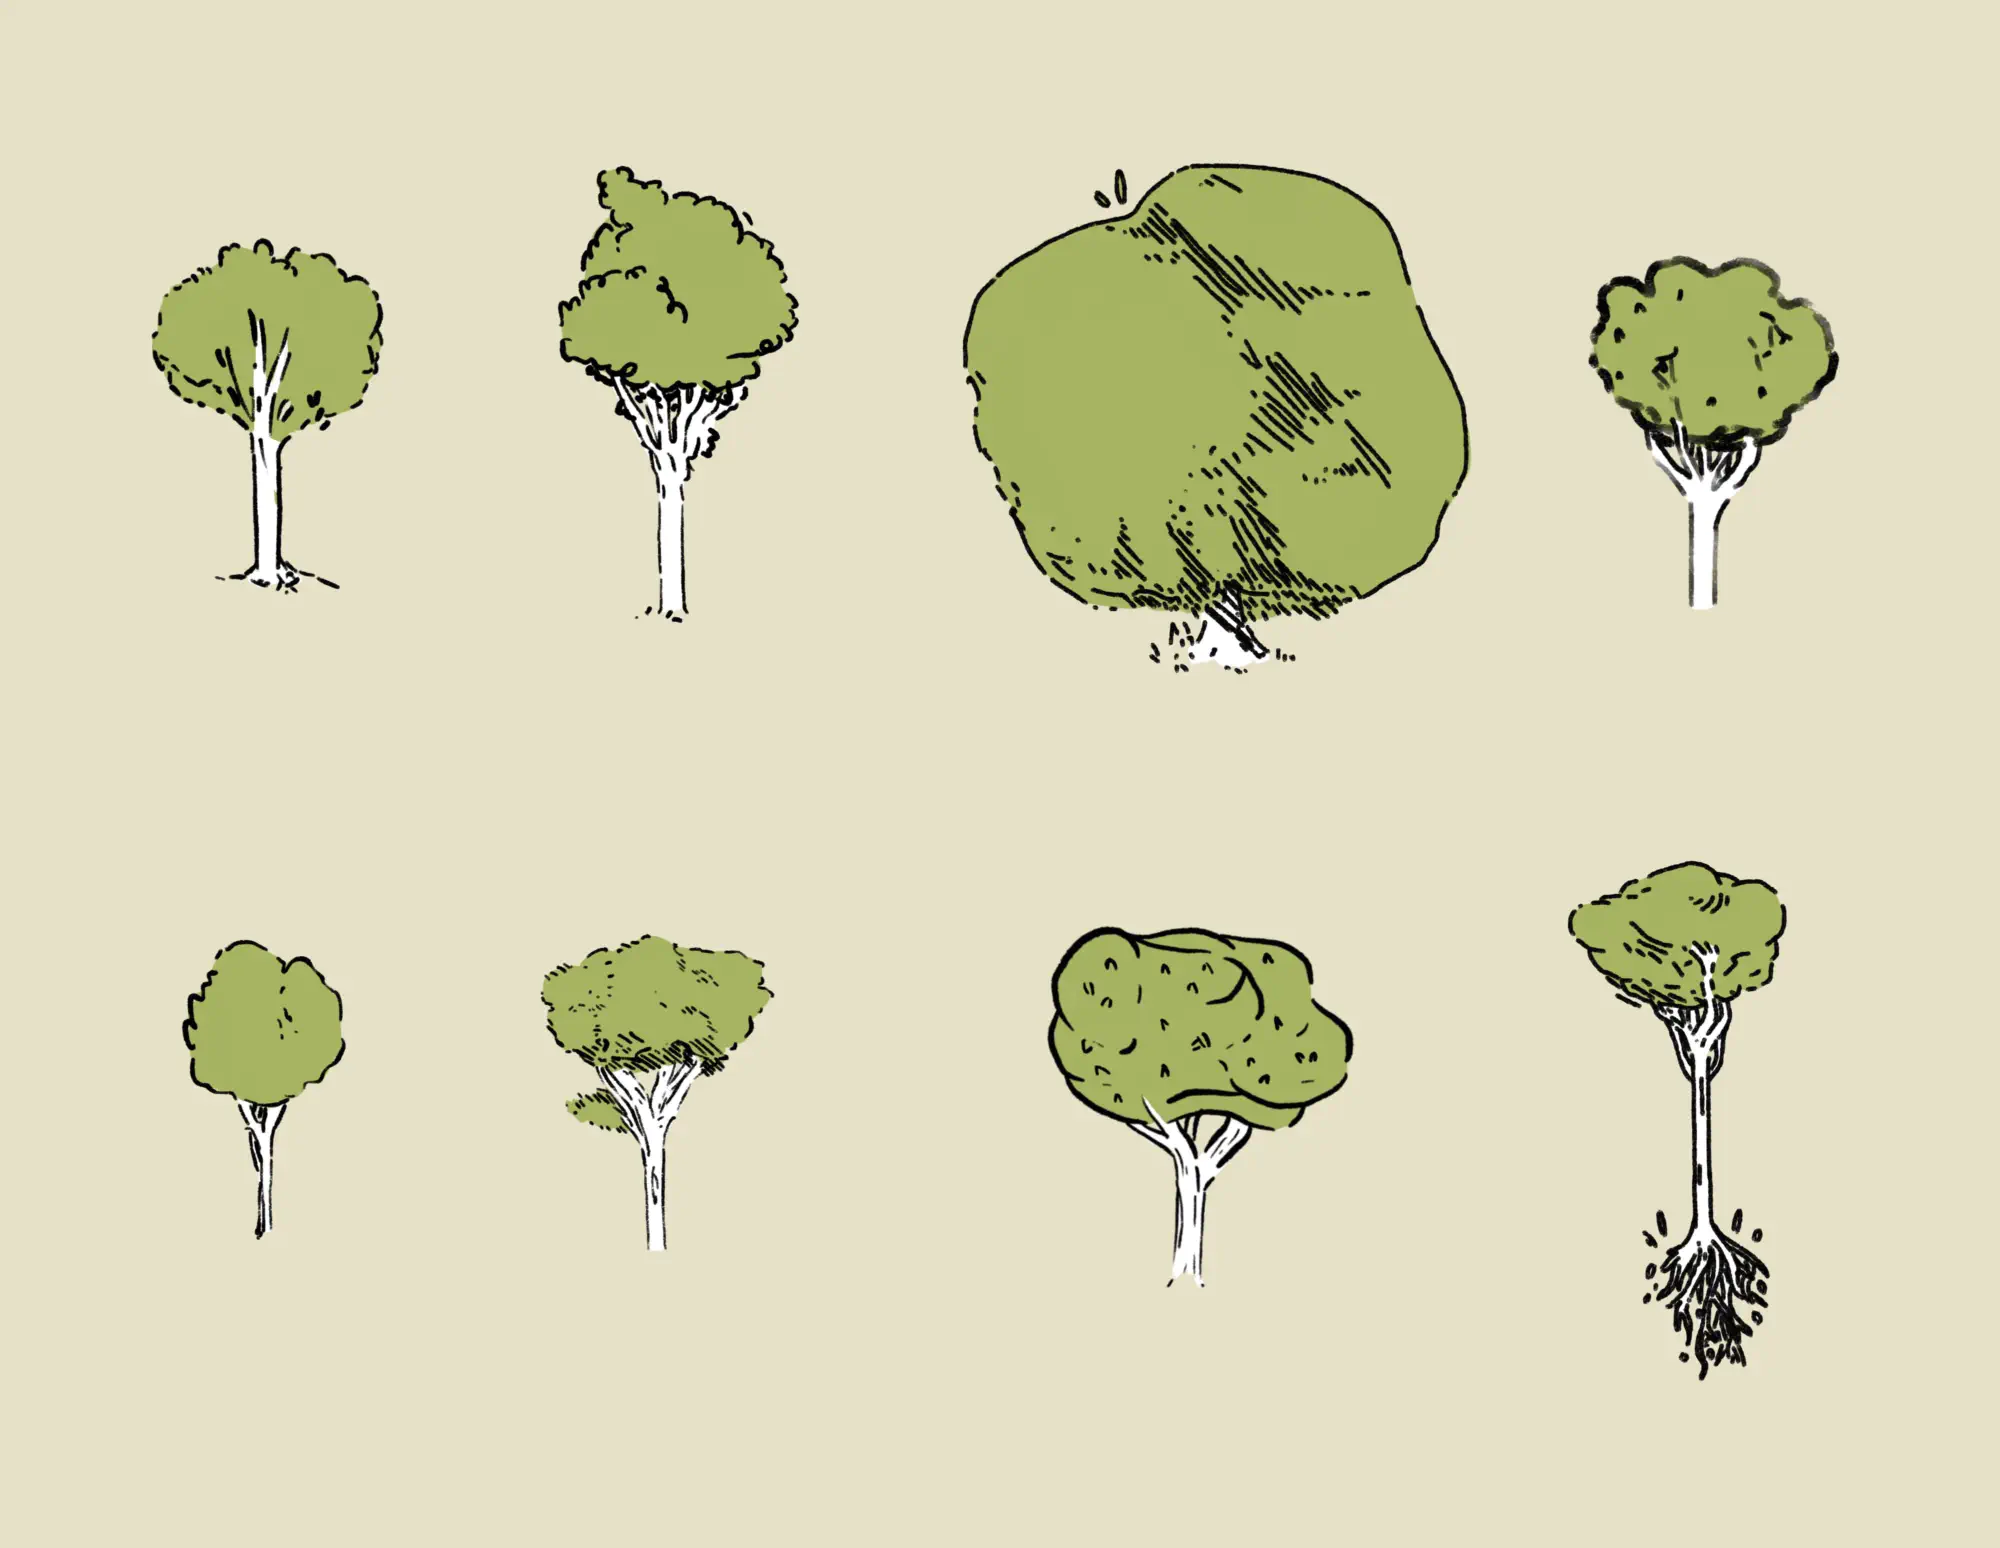  No matter growing up around forest, I think there are a million ways to draw a tree.
 